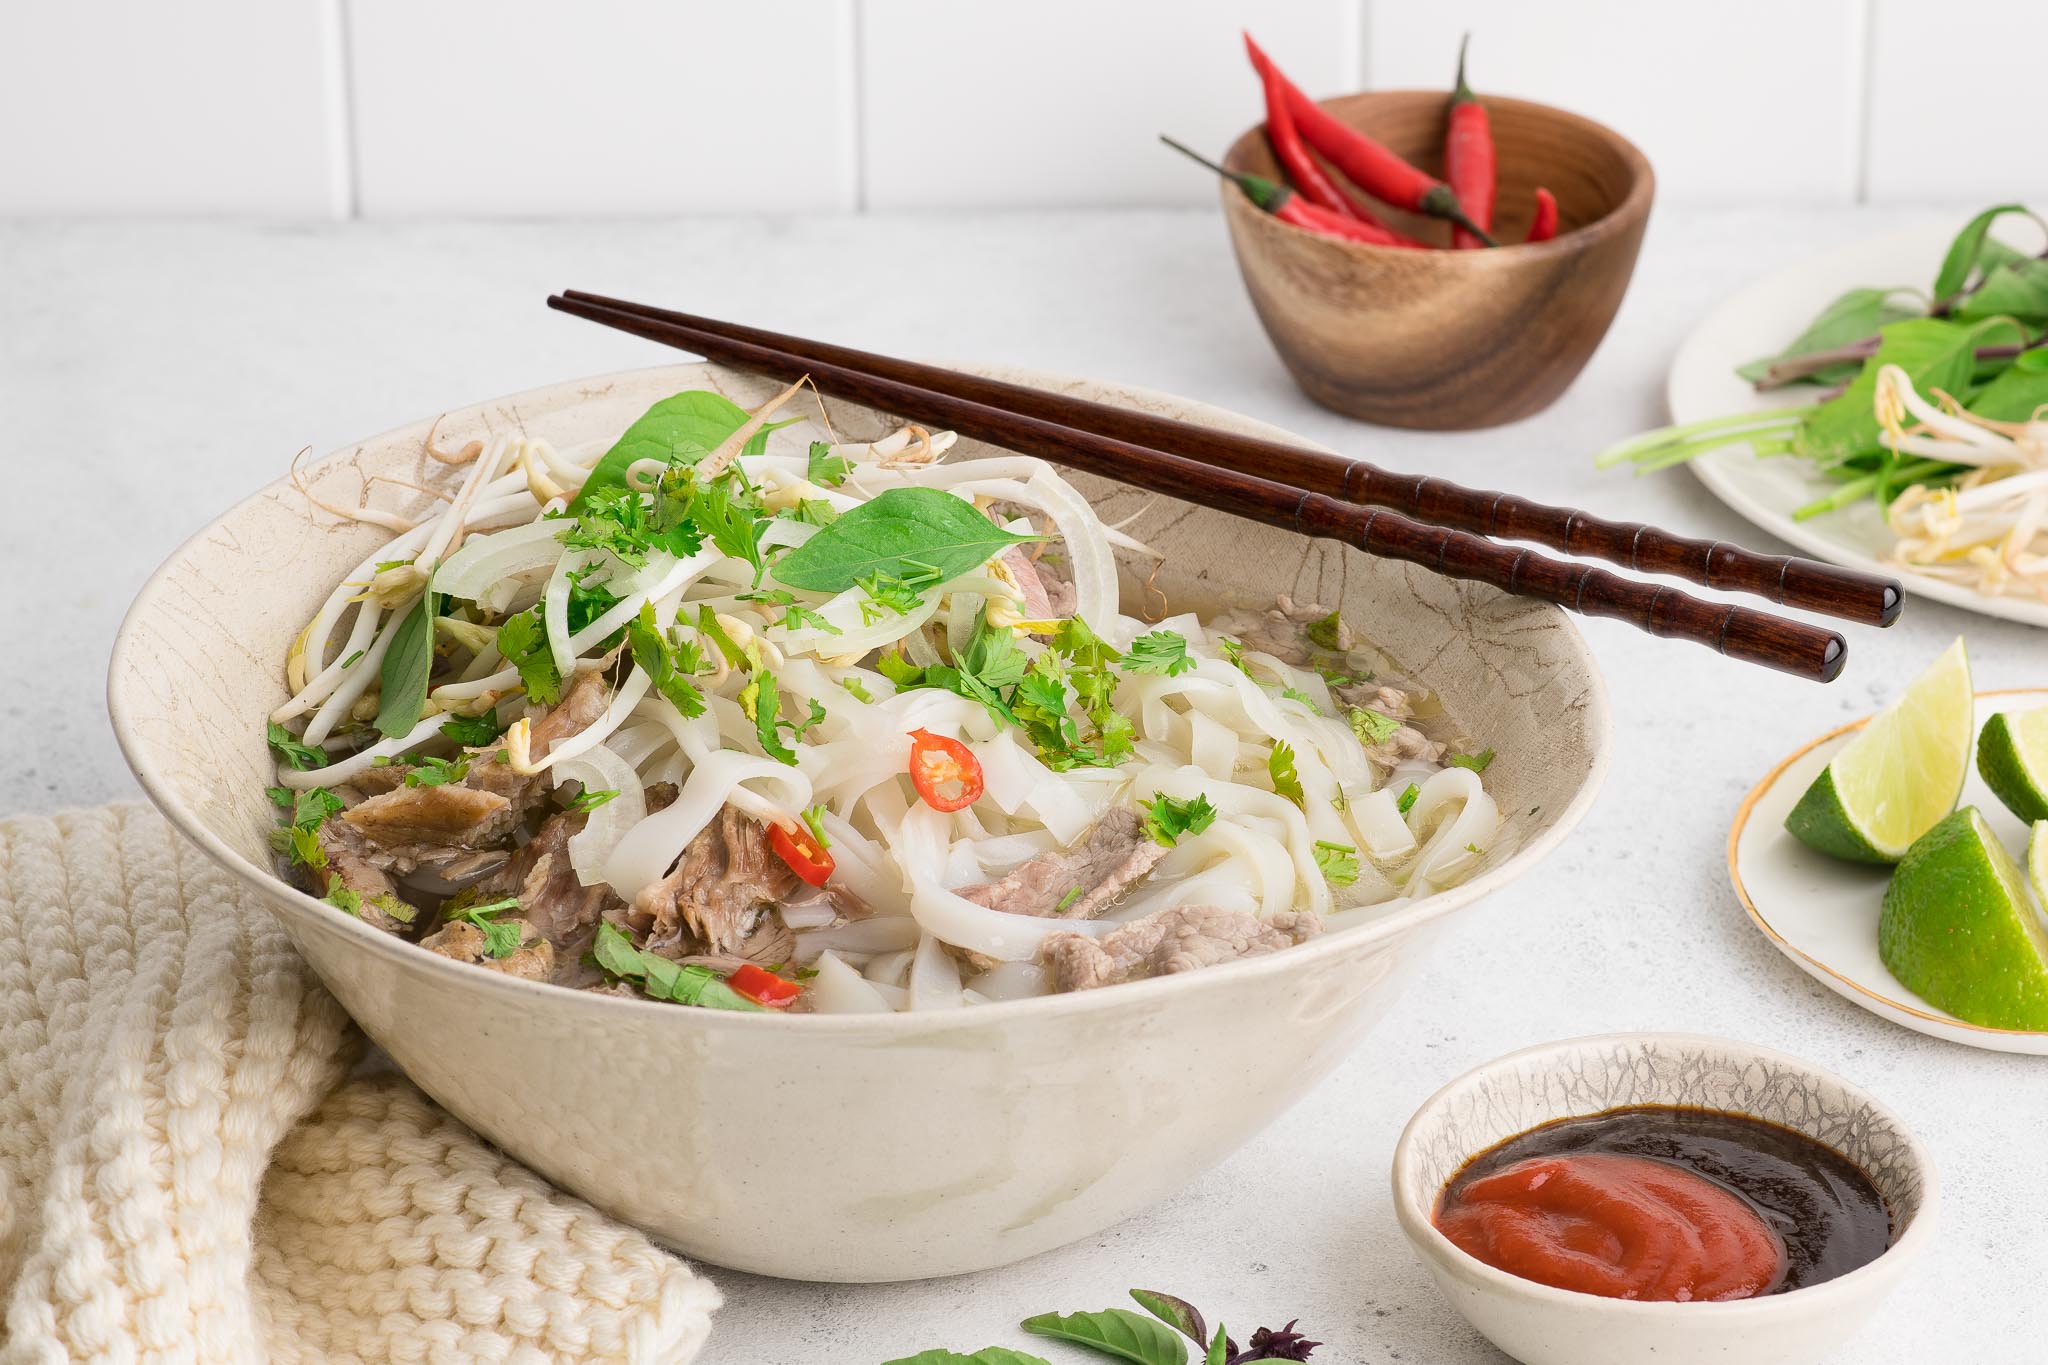 A look at the new menu for the upcoming Vietnamese restaurant, Pho H&M